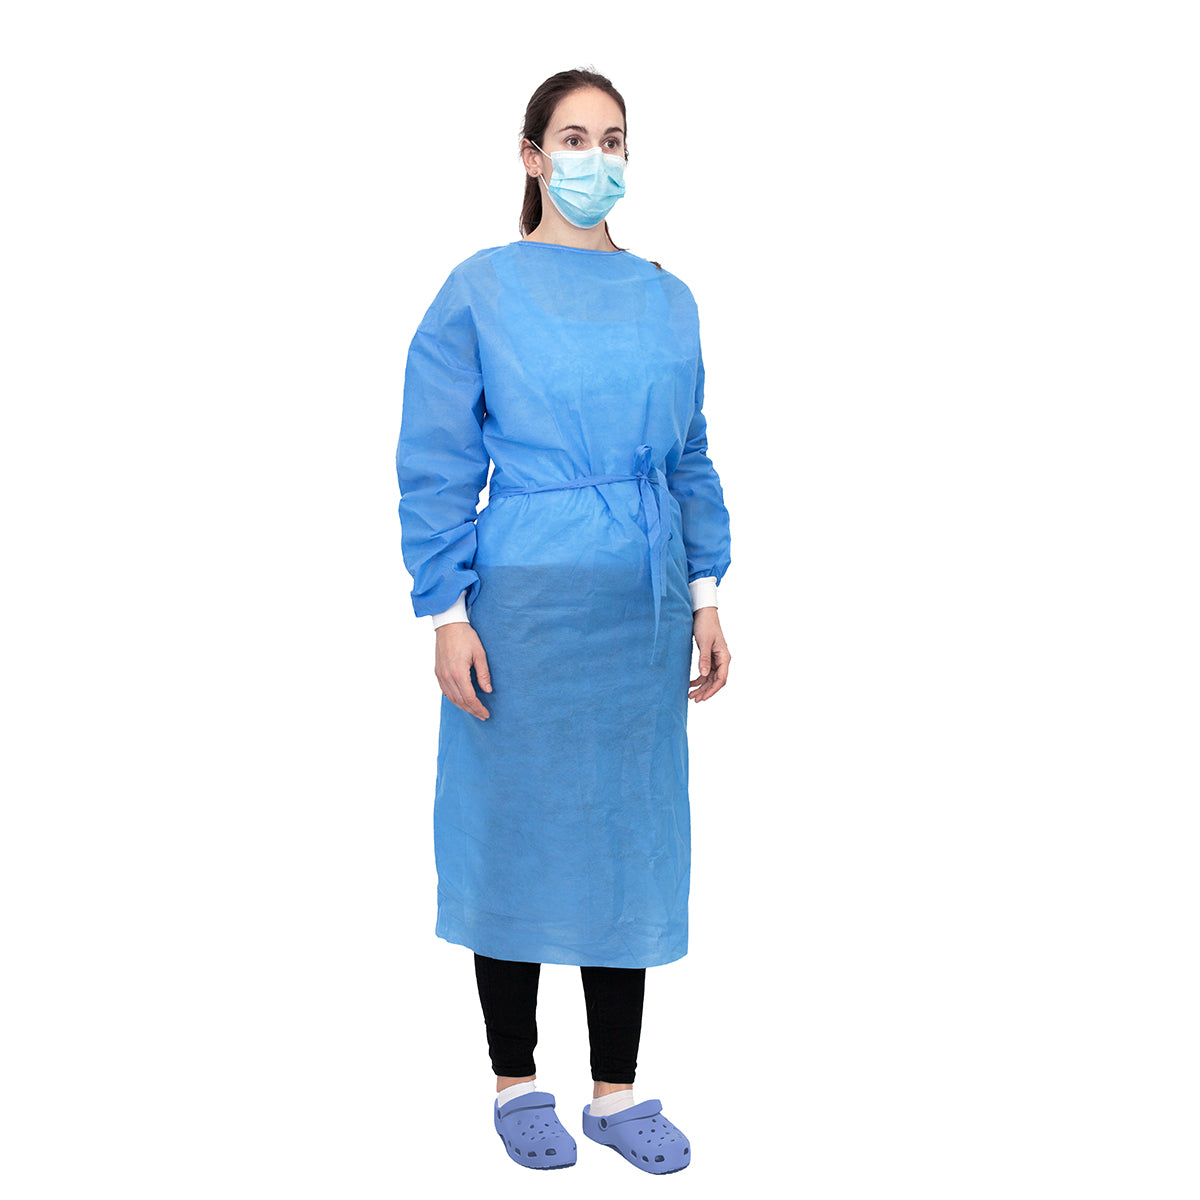 Examination Gown - Blue, Extra Large, 130 X 160 CM